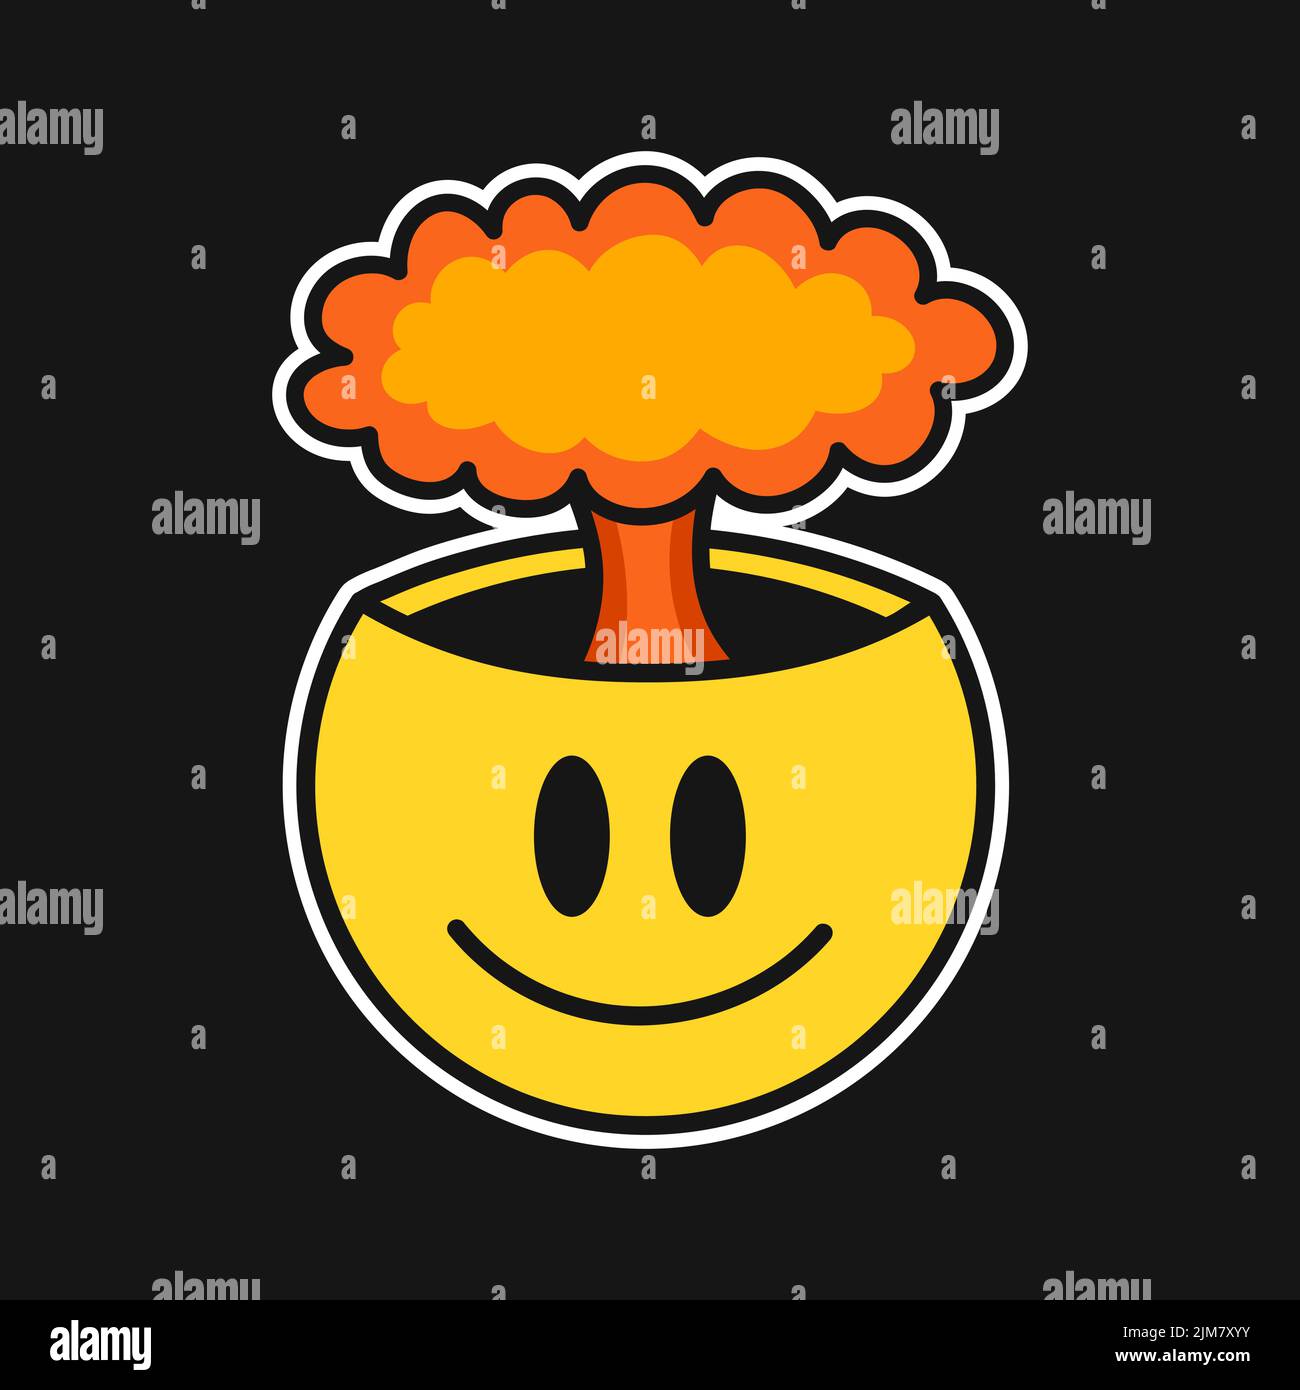 Funny smile face with nuclear explosion inside. Vector hand drawn doodle 90s style cartoon character illustration. Trippy smile face, nuclear explosion print for t-shirt,poster,card,patch,logo concepе Stock Vector